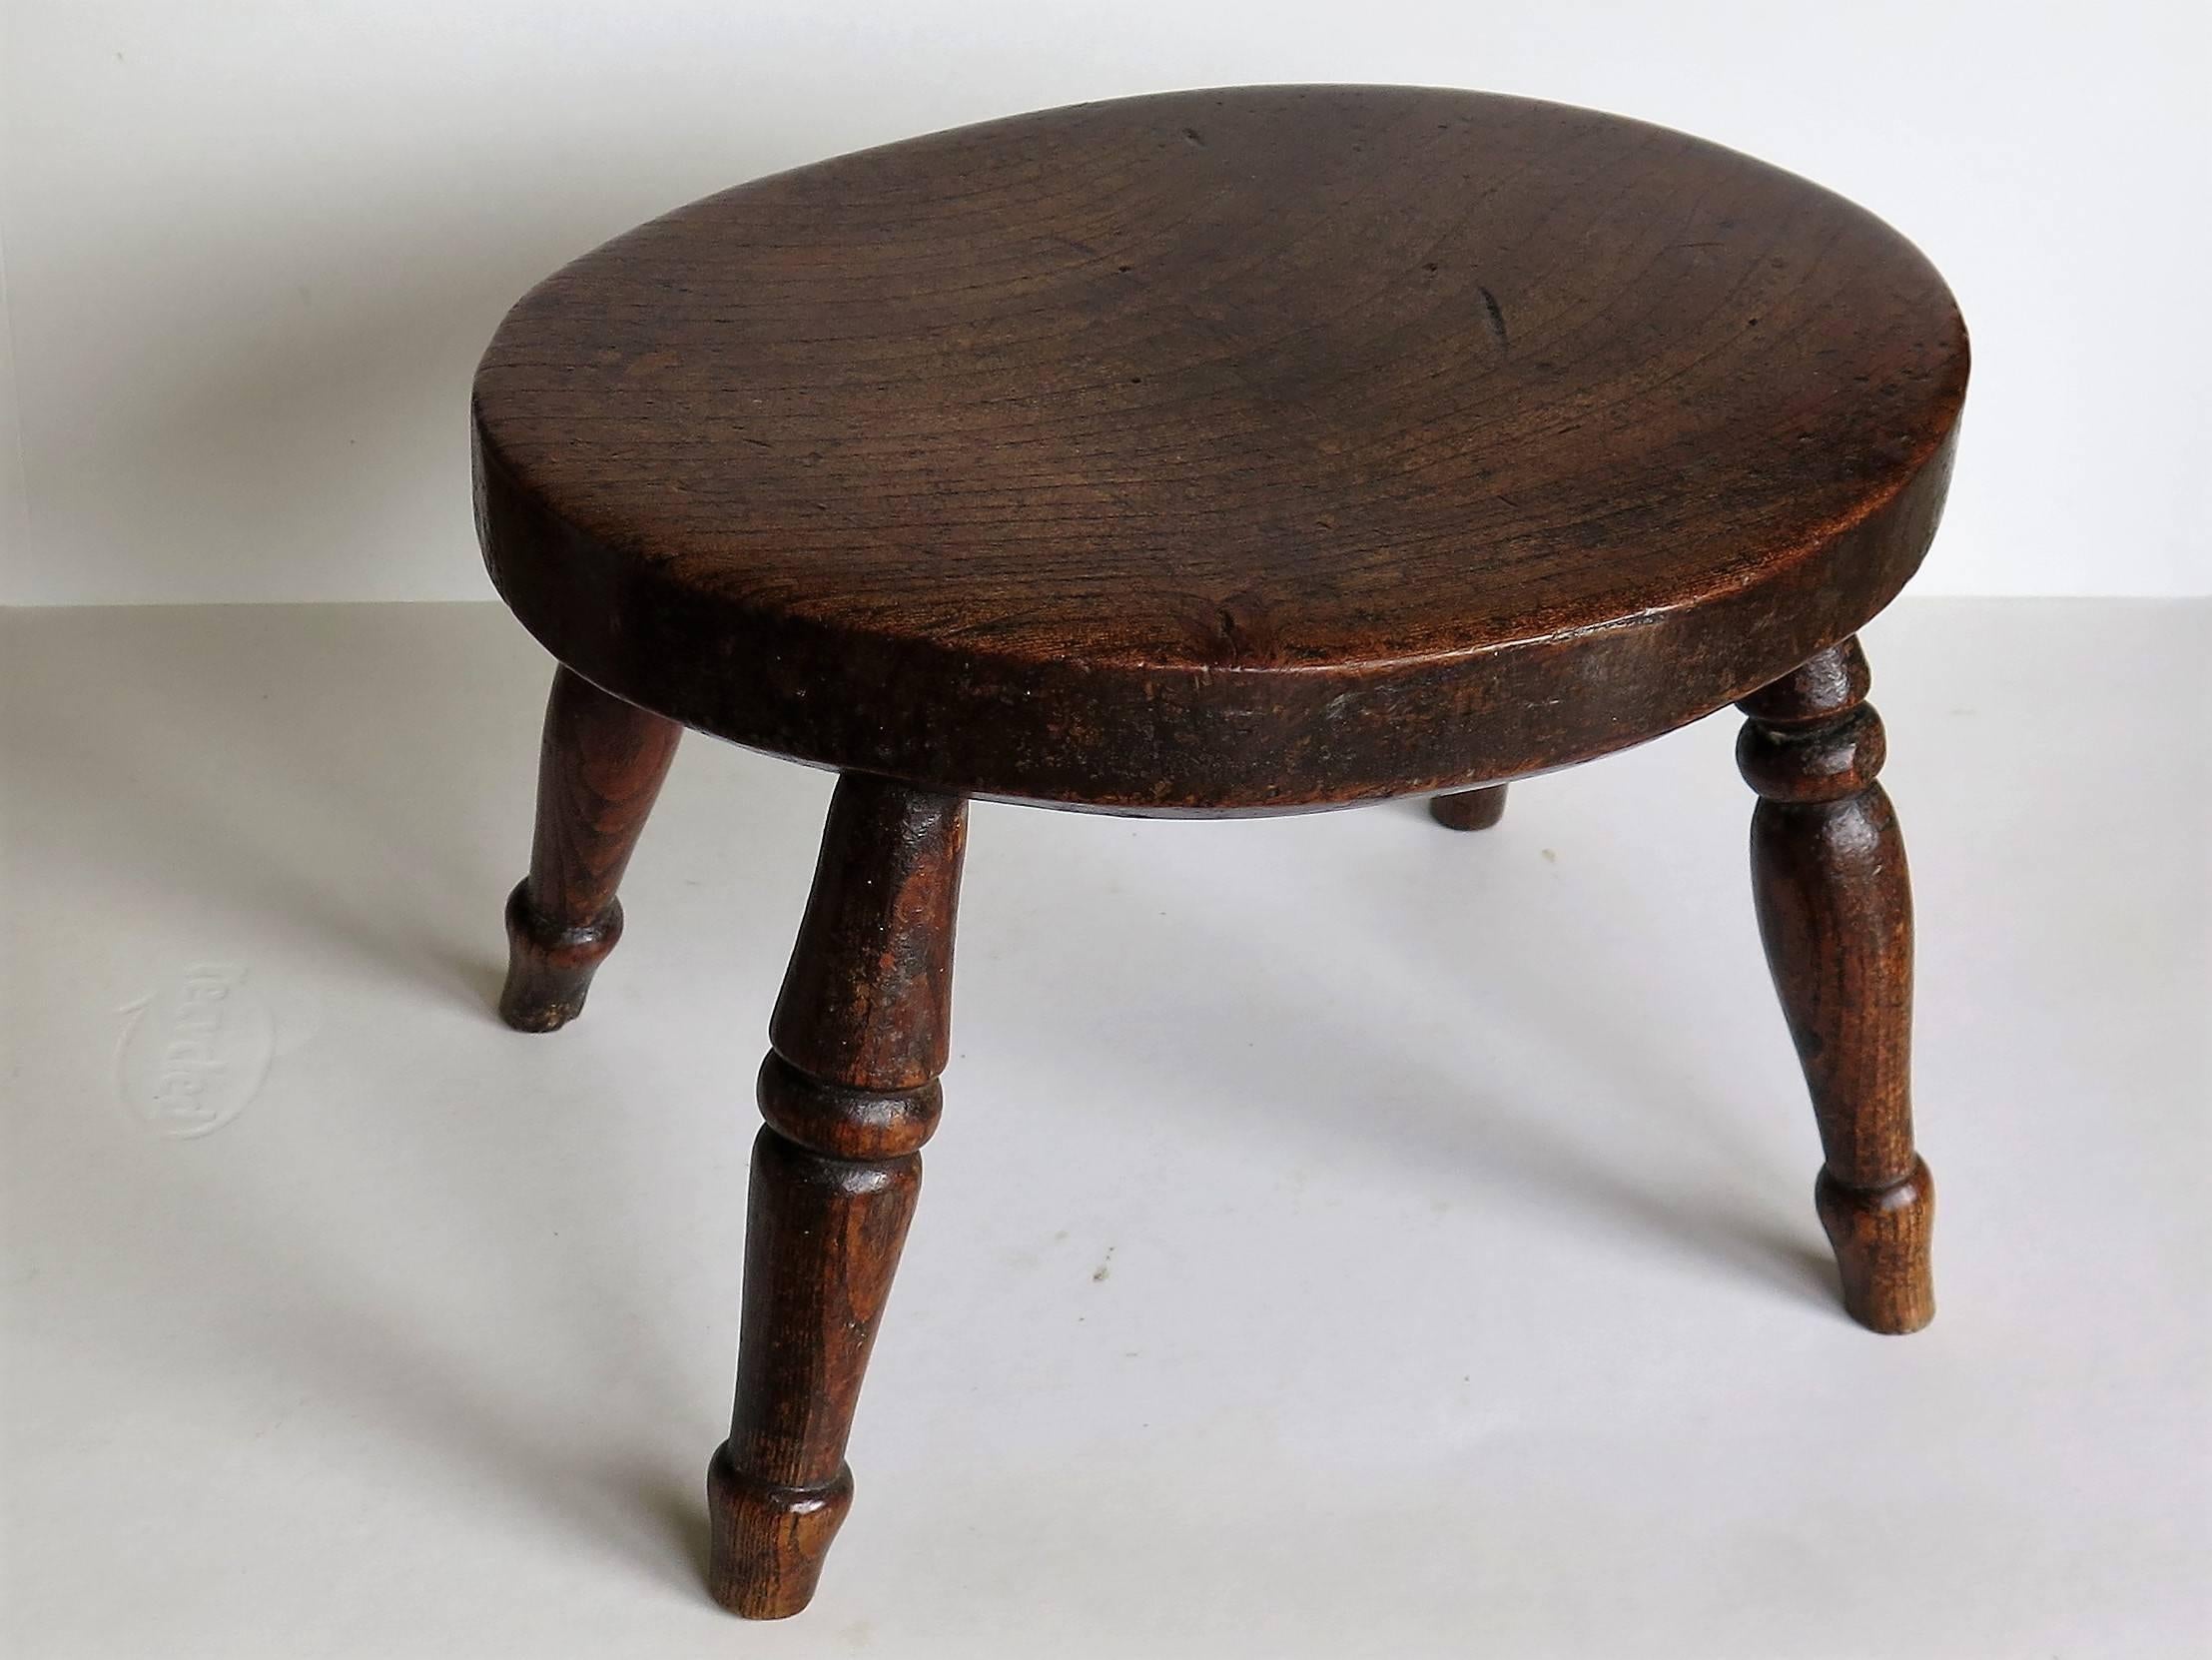 This candle stand or stool is a good example of English Country furniture.

The thick oval top is made of solid elm and has a lower chamfered edge. The legs are also made from elm and are well turned, splaying slightly outwards. The legs have